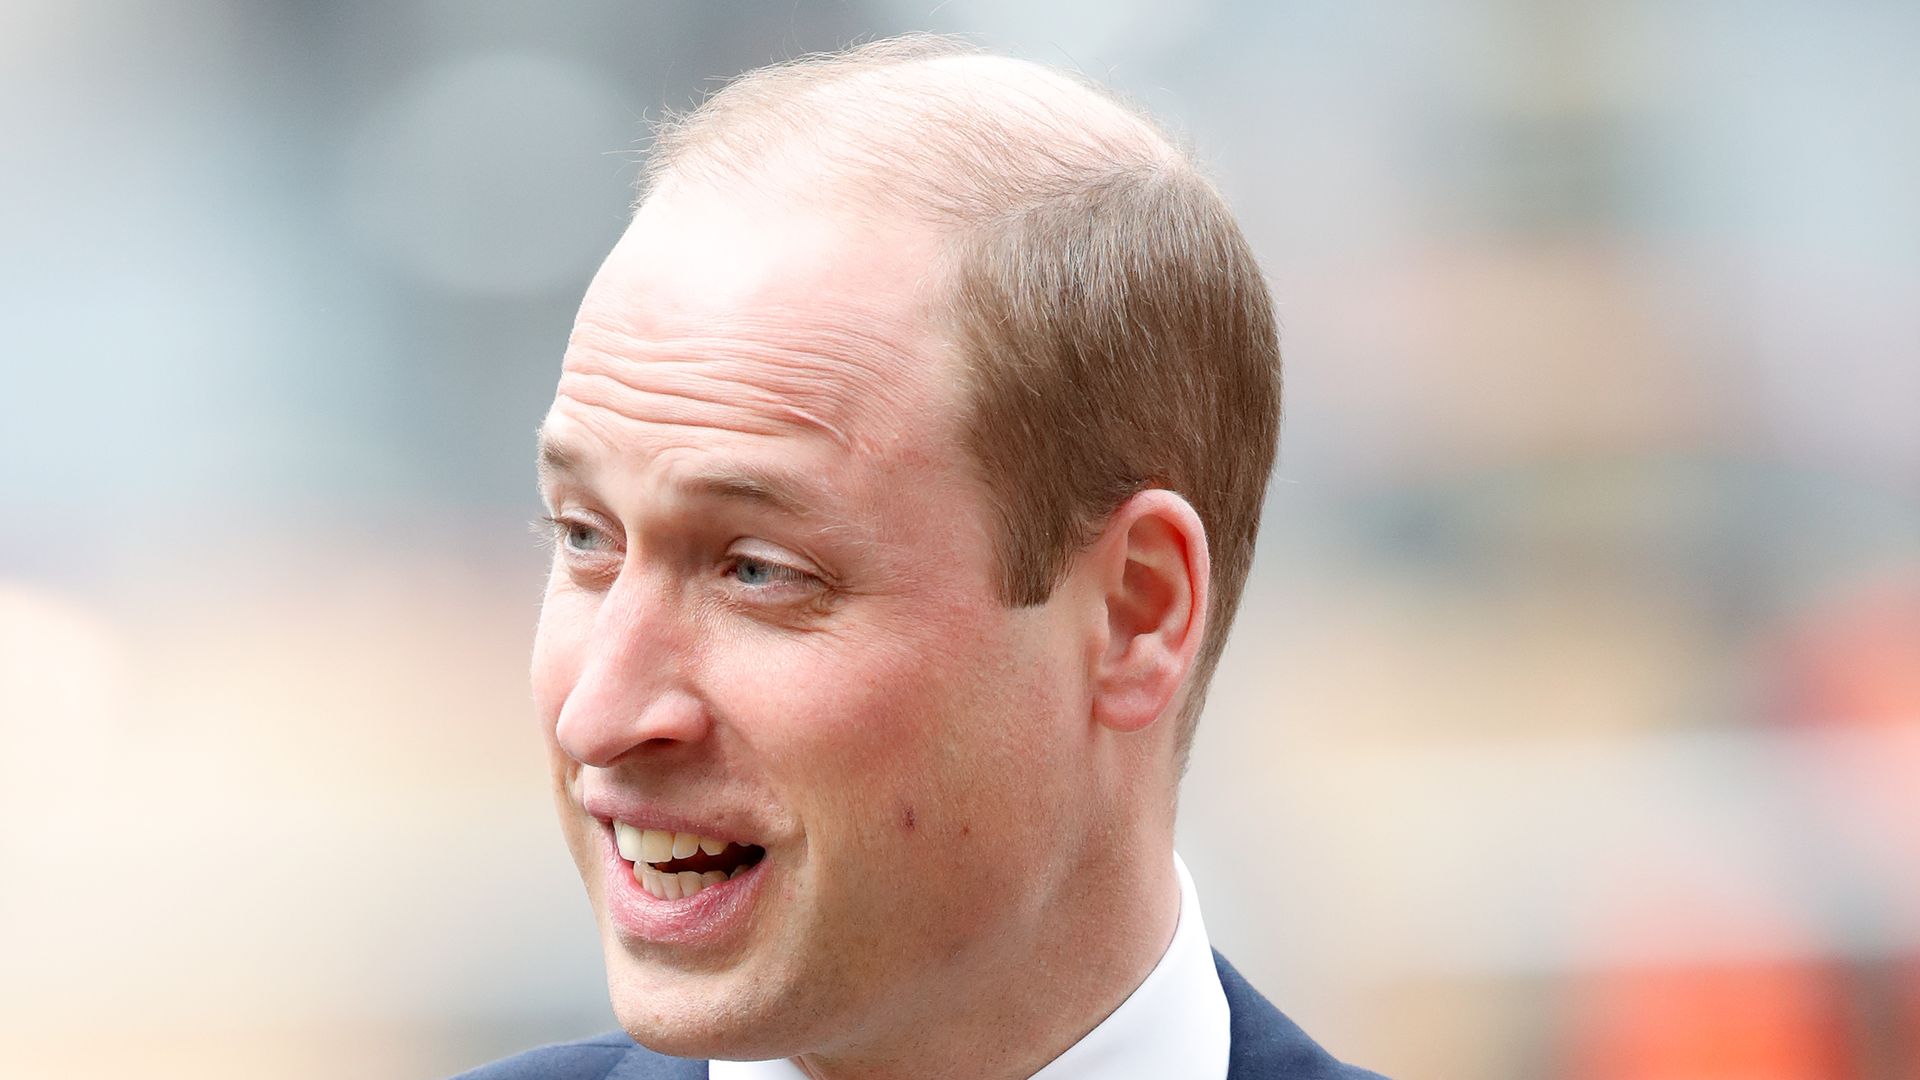 Prince William laughing in a suit